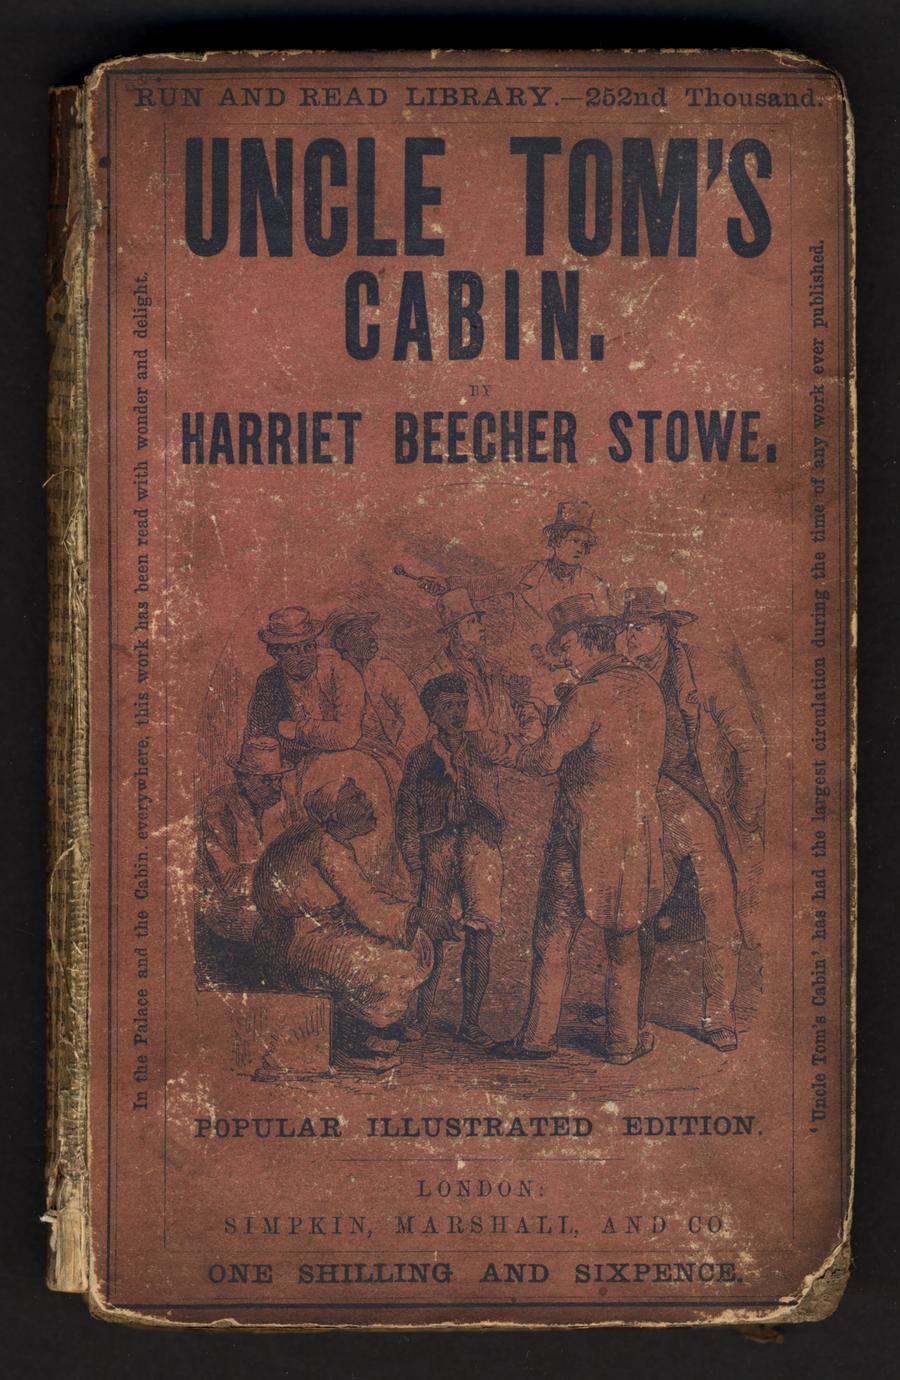 Uncle Tom's cabin : or, Negro life in the slave states of America (1 of 4)